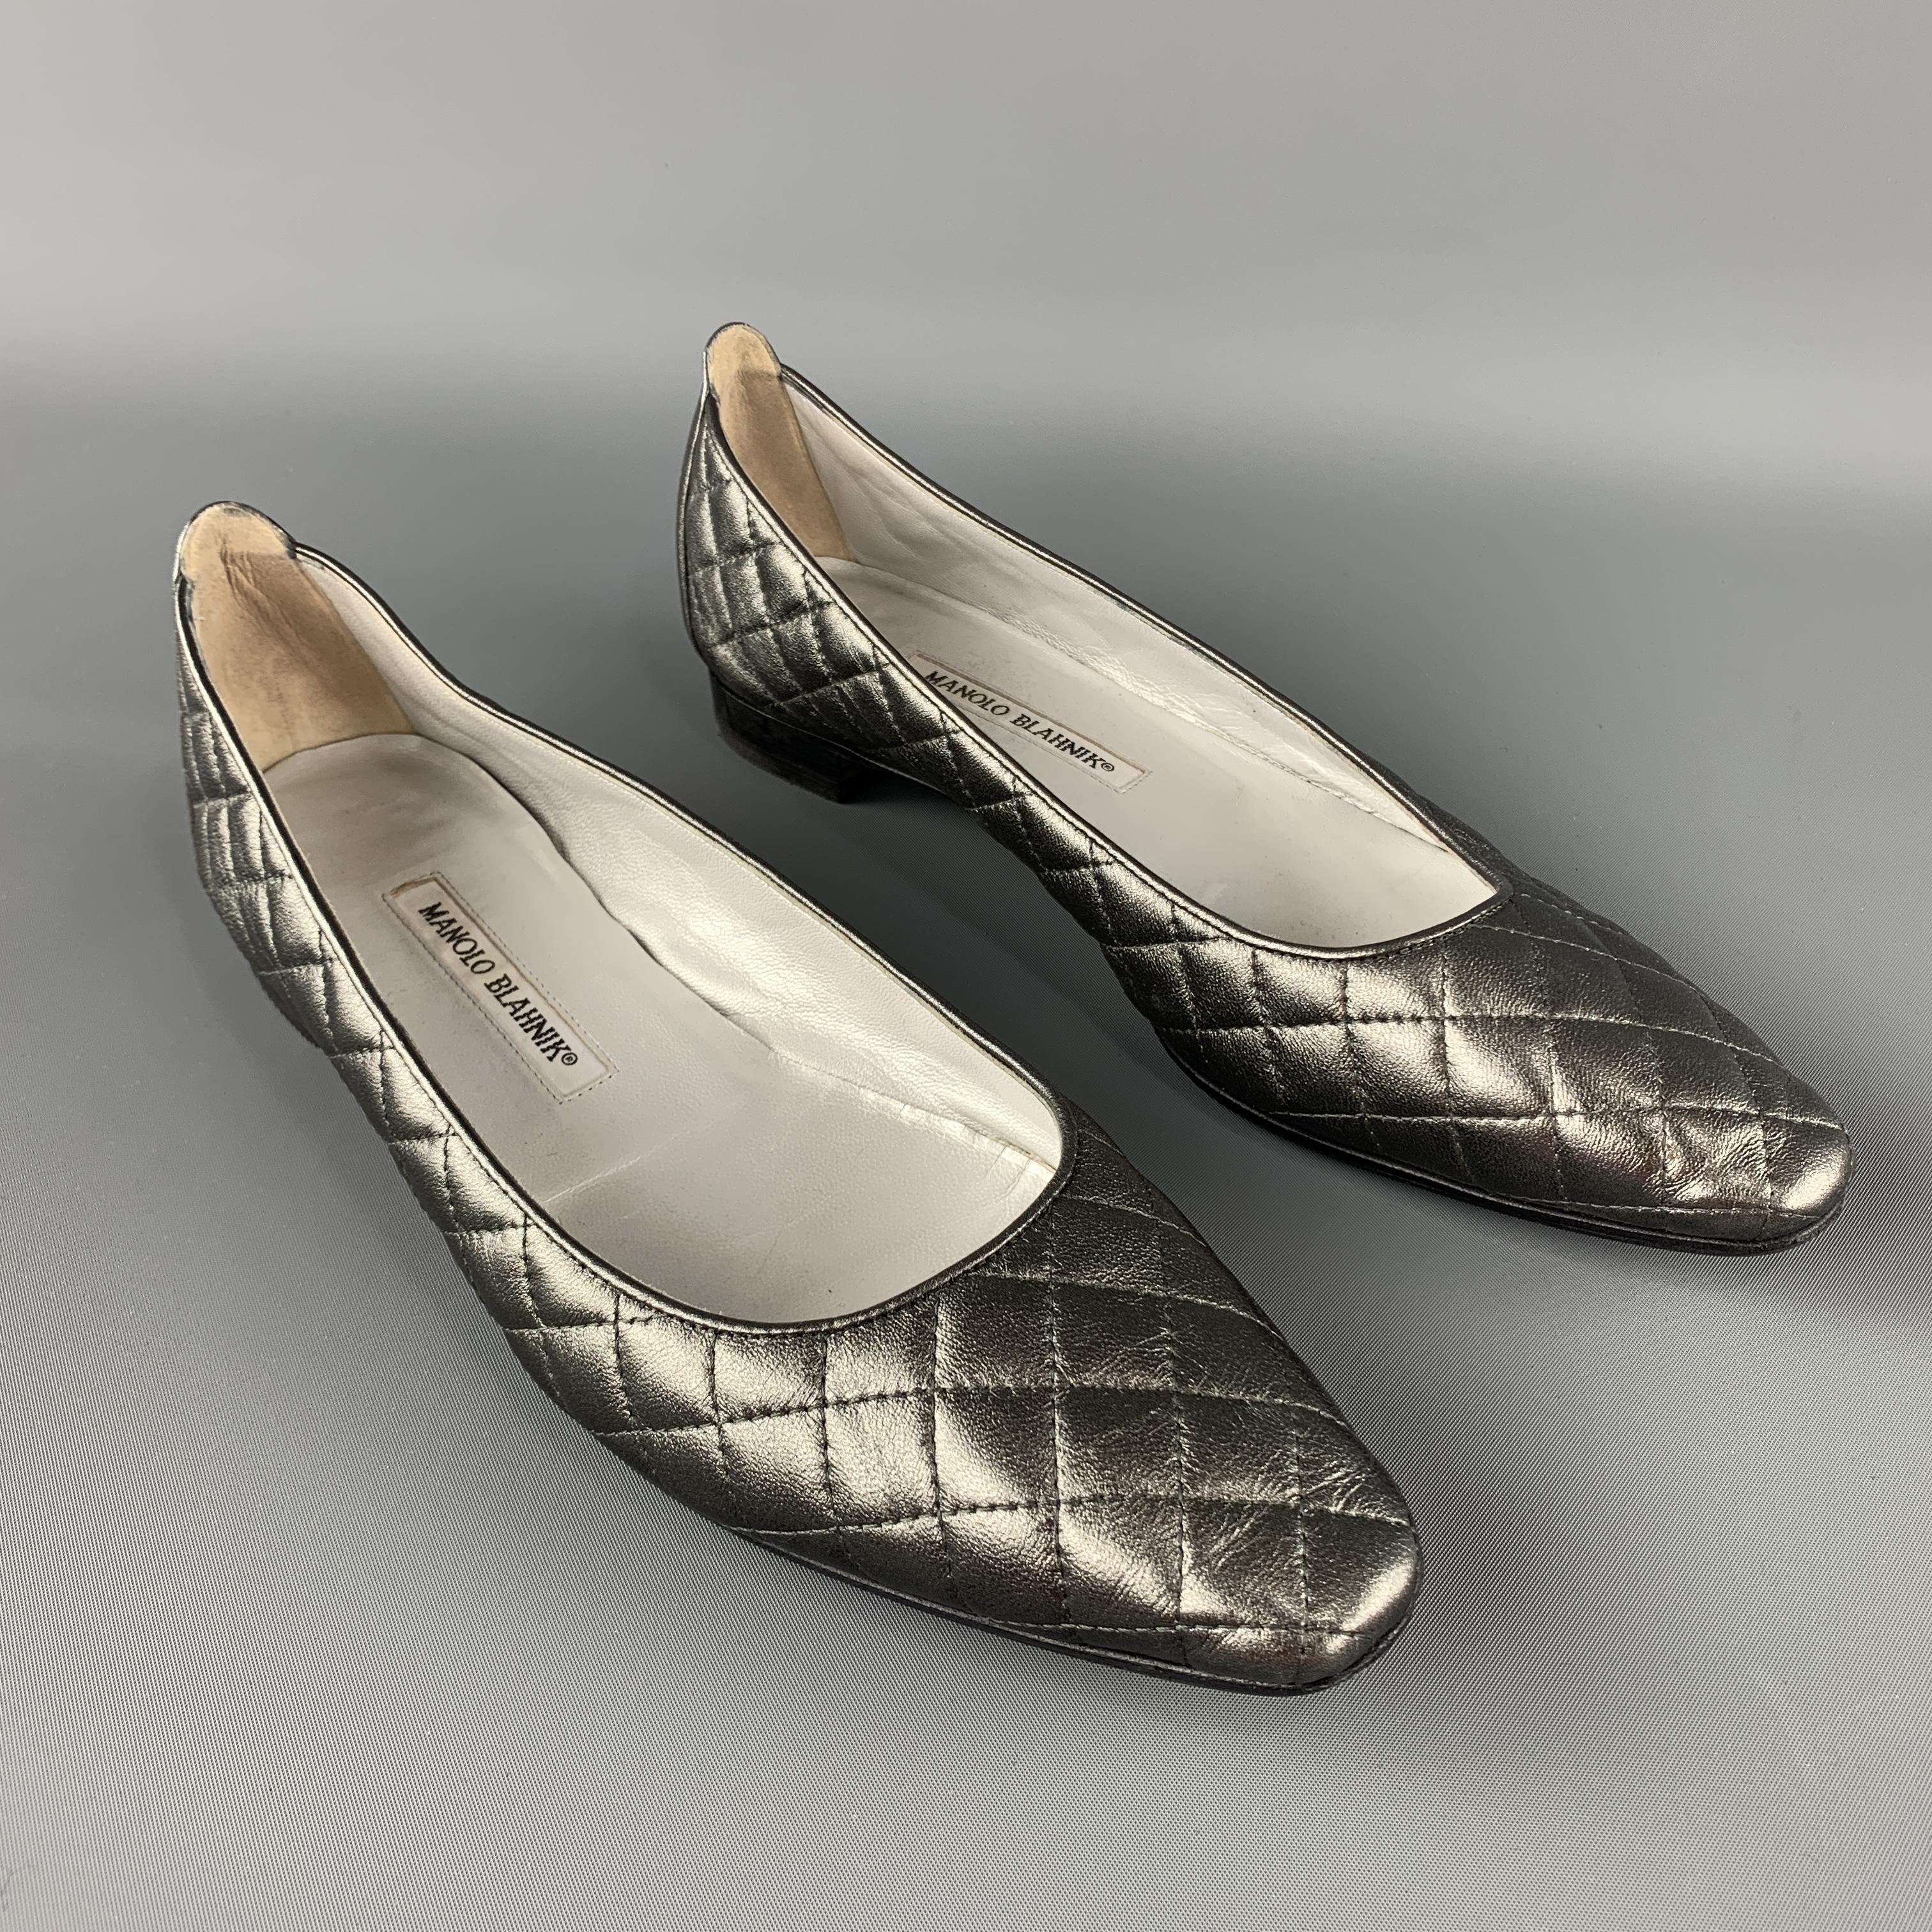 MANOLO BLAHNIK Giungla Flats comes in a grey tone in a quilted leather material, with a rounded toe, resoled.
 
Excellent Pre-Owned Condition.
Marked: IT 40 1/2
 
Outsole: 11 x 3.5 in.